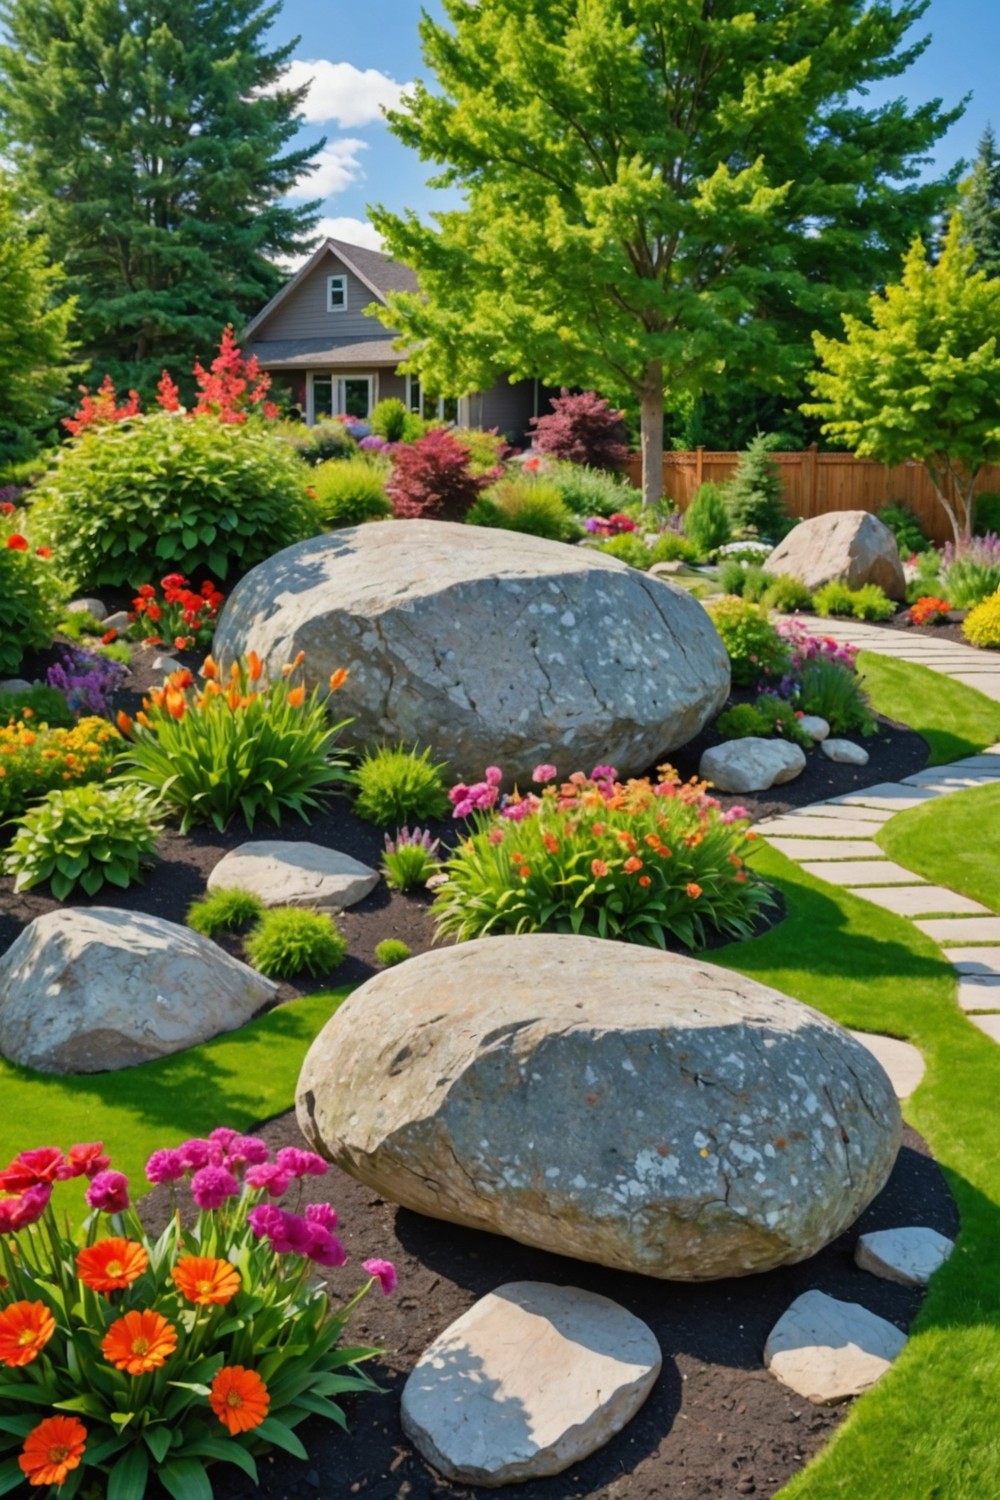 Incorporating Large Stones and Boulder into the Landscape